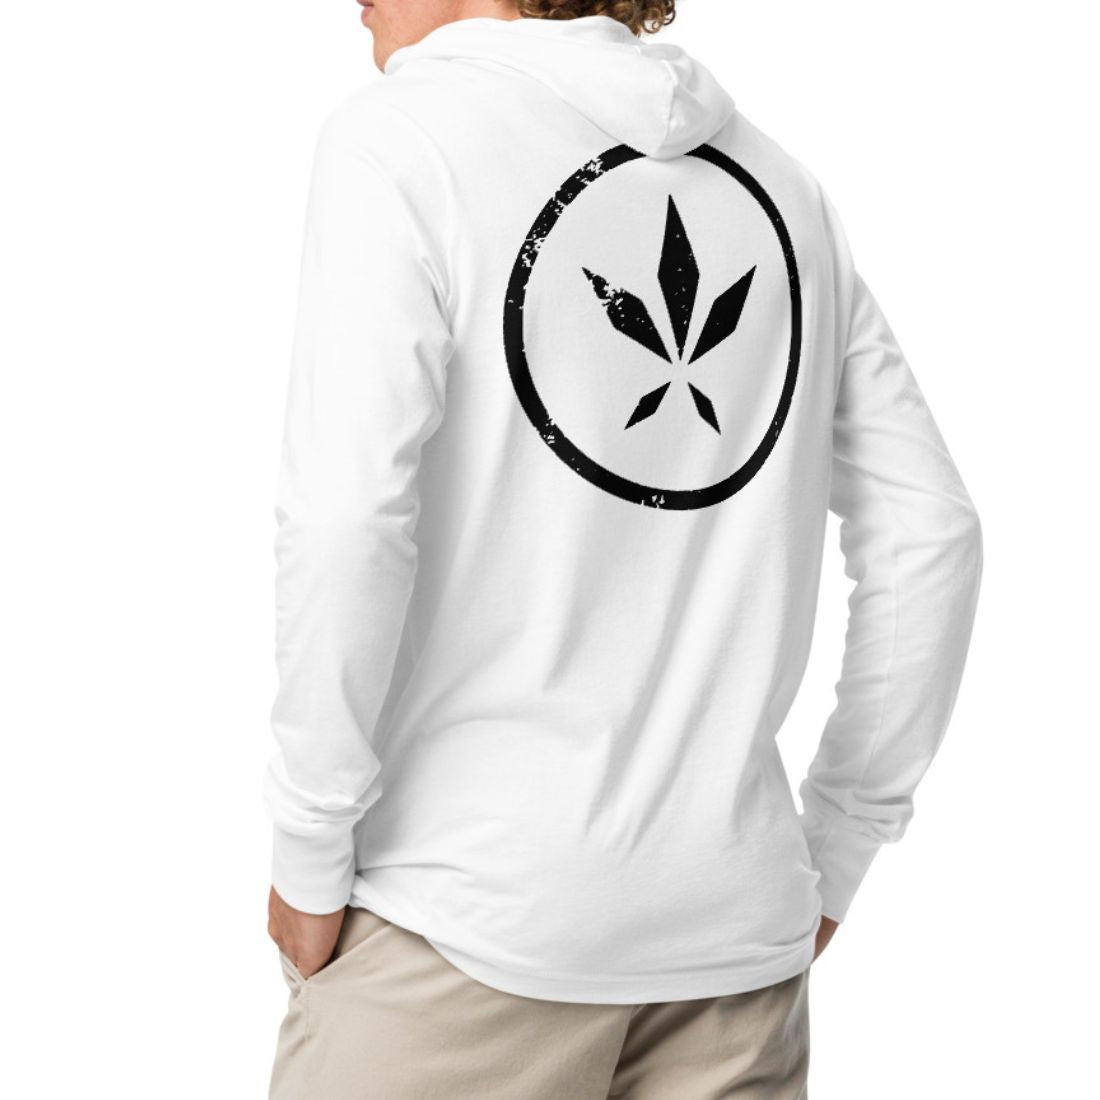 Embroidered Tower Logo Hooded Long Sleeve Tee - White - Blazed Wear